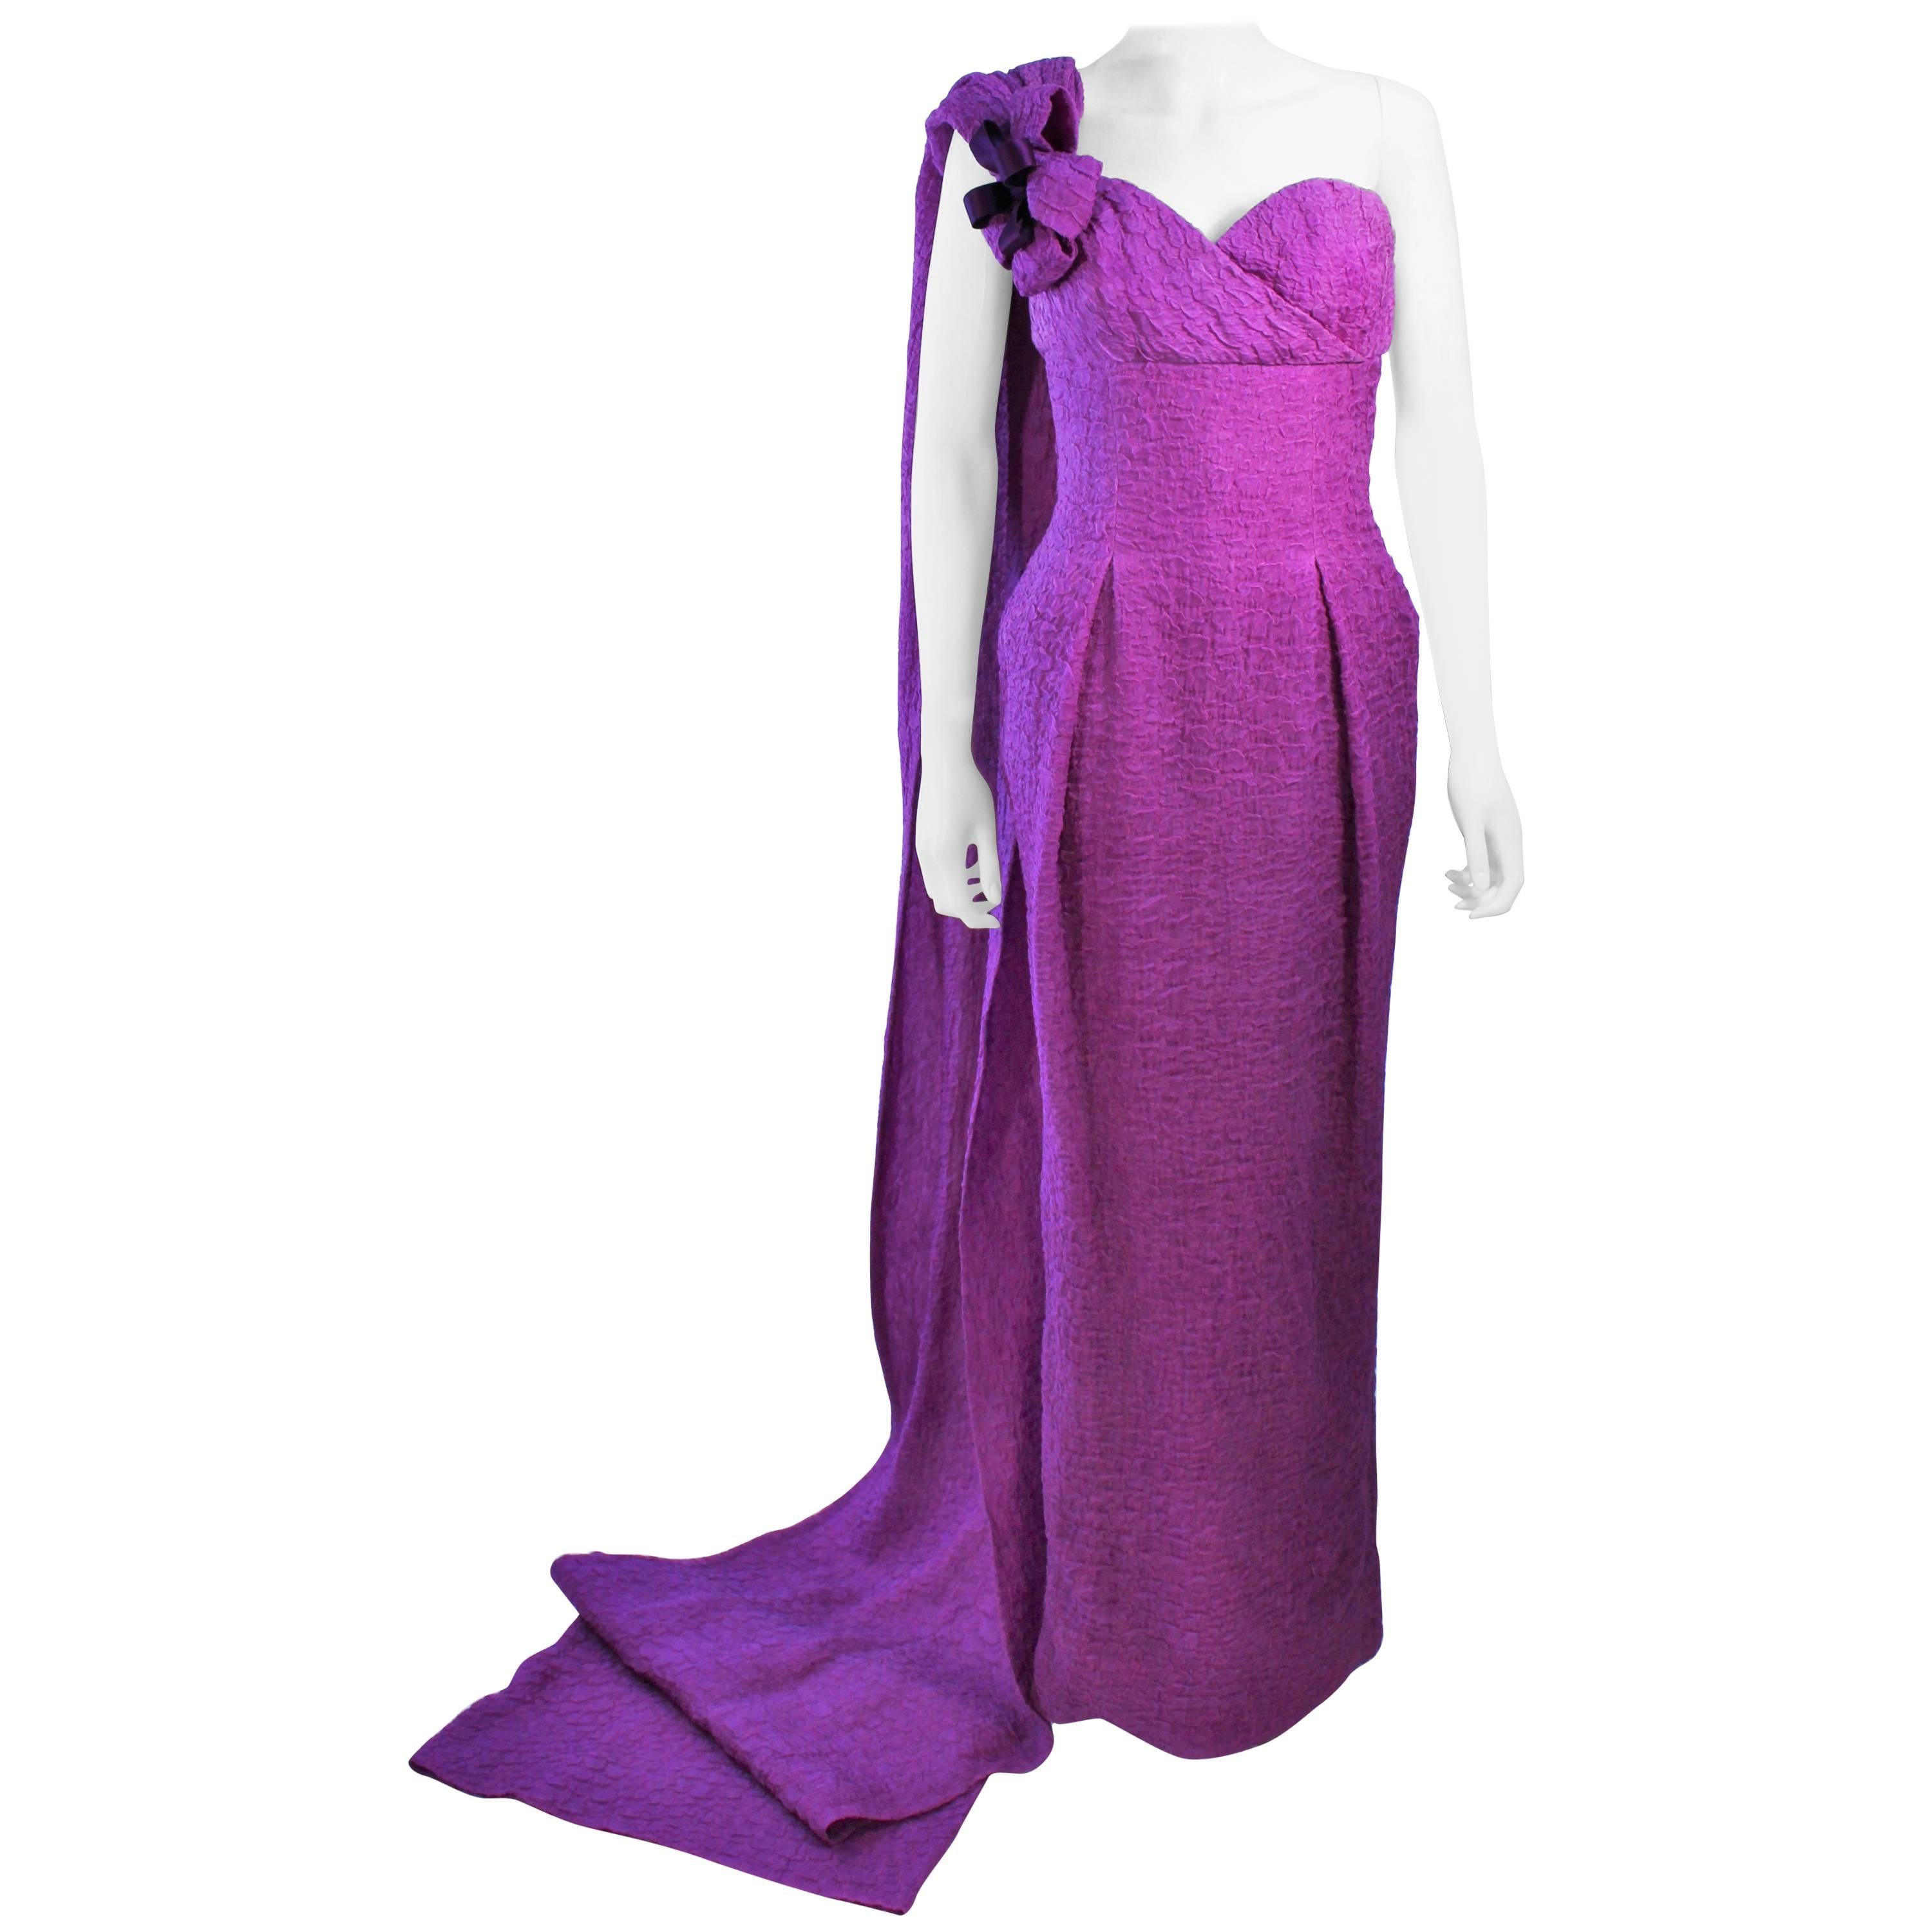 CHRISTIAN DIOR HAUTE COUTURE Purple Crinkle Gown Betsy Bloomingdale 1988